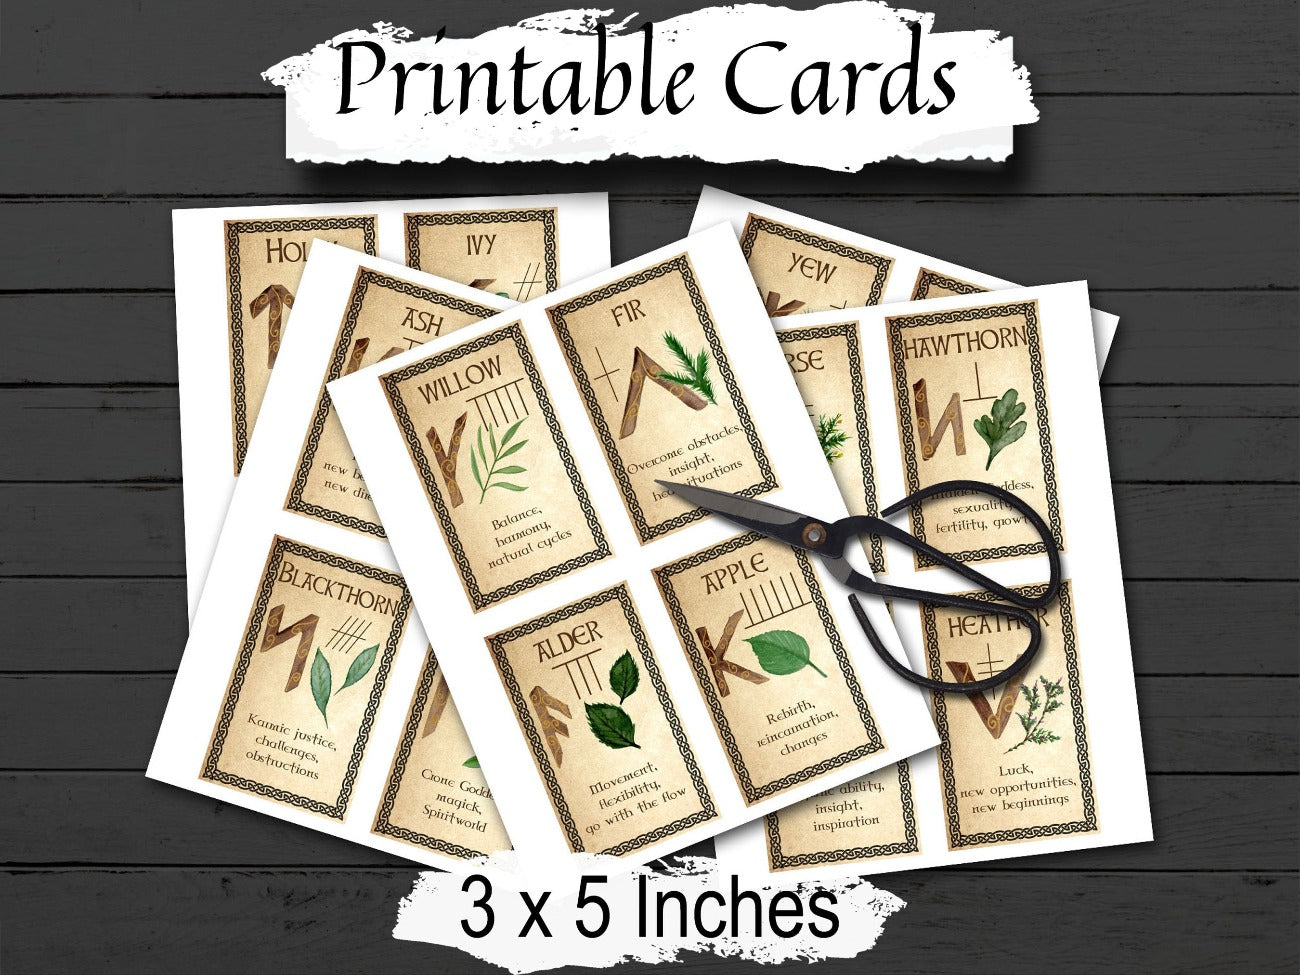 OGHAM ORACLE CARDS Wicca Witchcraft Oracle Cards to Print at Home, Ogham Tarot Printable Oracle Deck Messages, Celtic Ogham Spirit Deck - Morgana Magick Spell